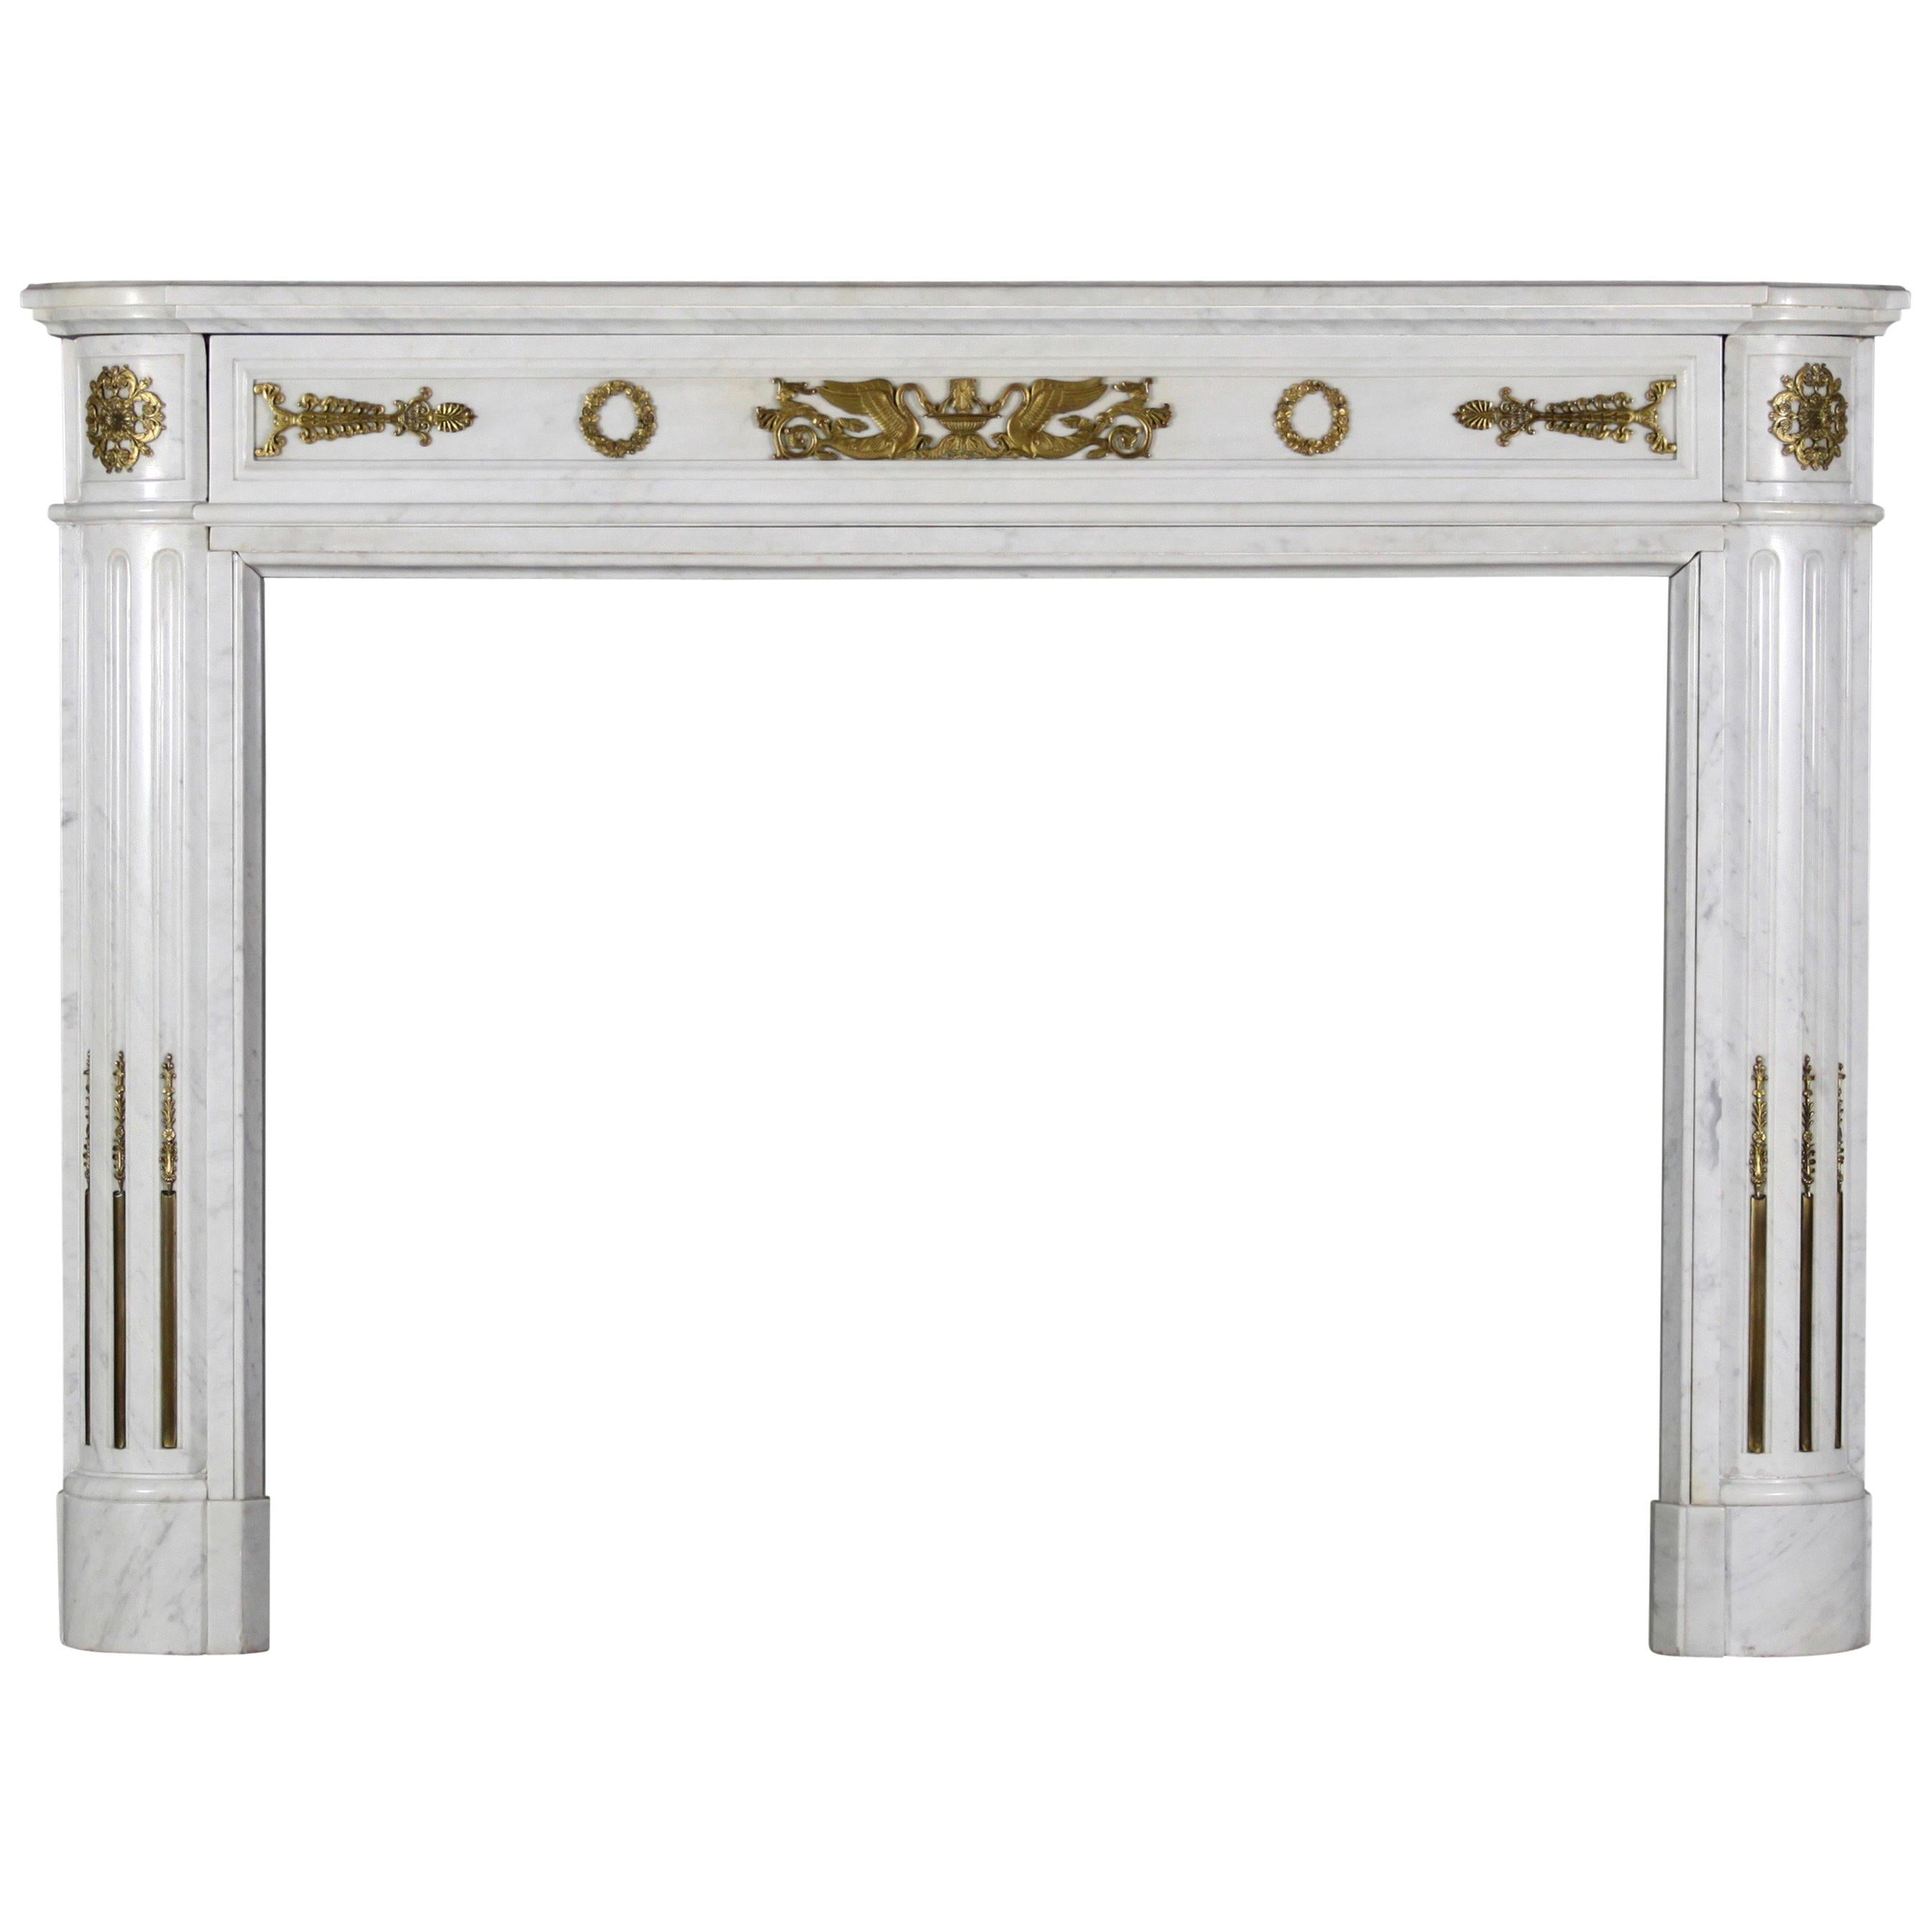 Fine 19th Century European Original Antique Fireplace Mantle from Empire Period For Sale